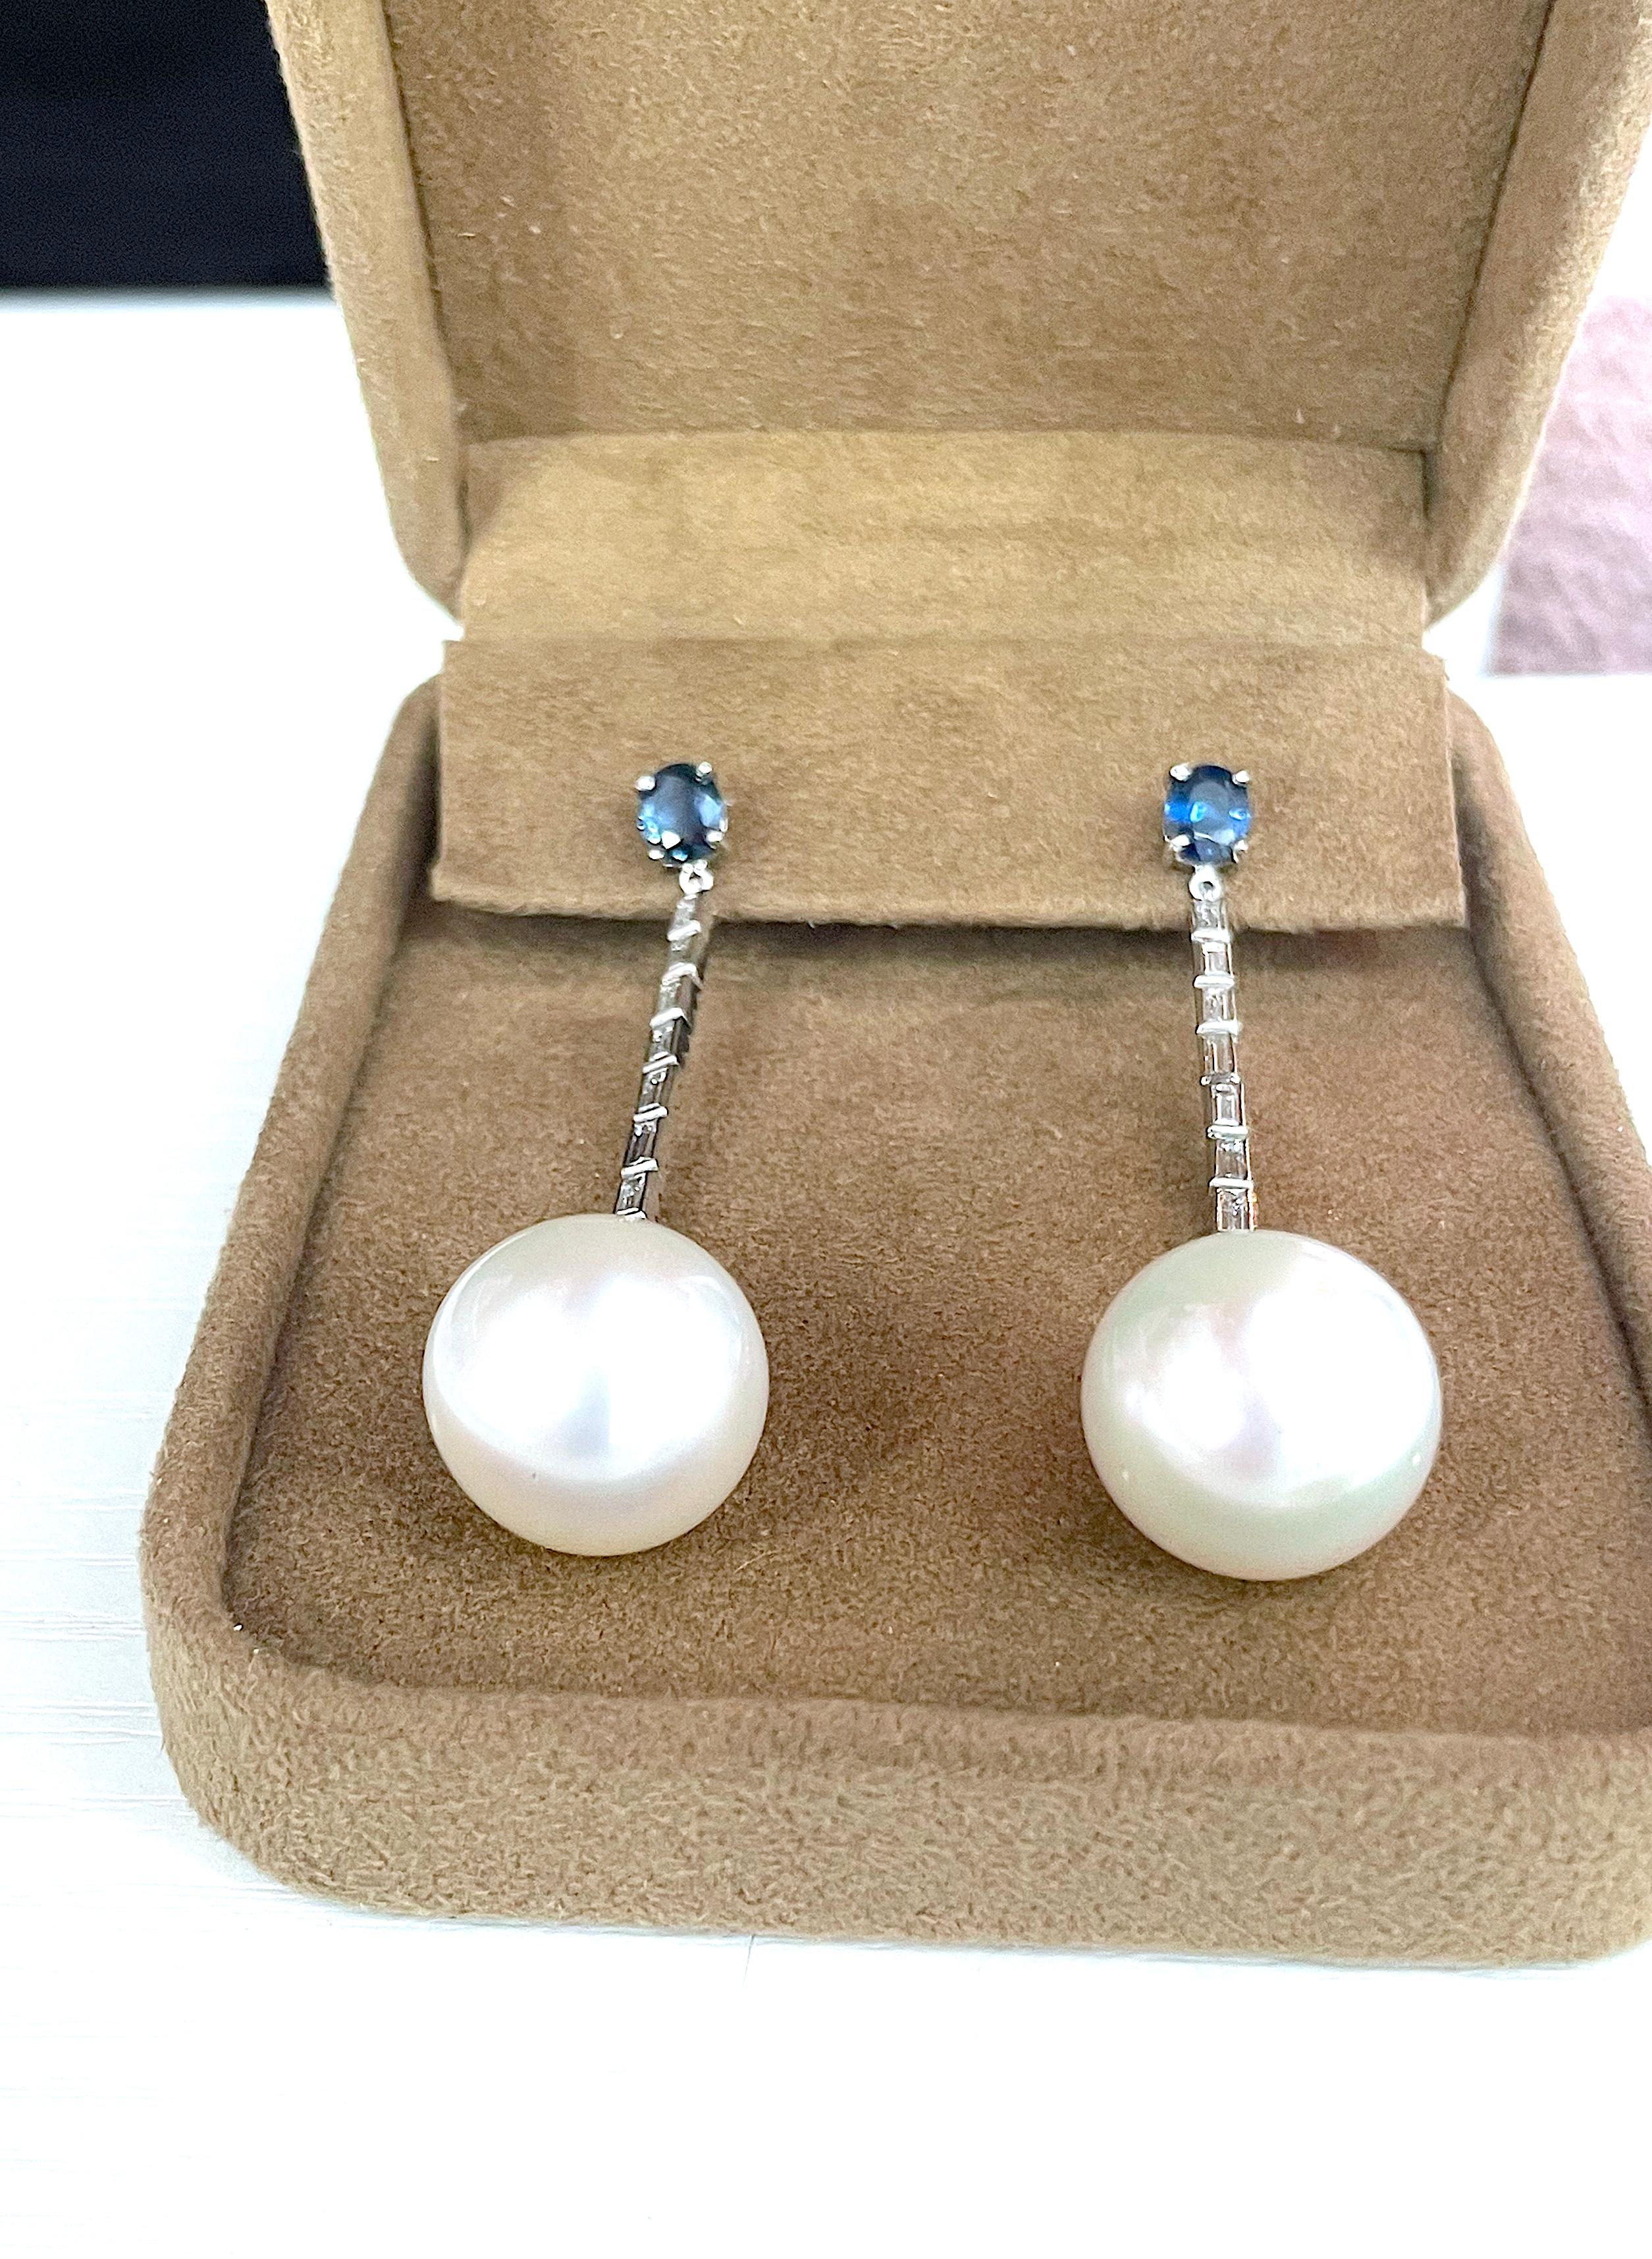 Sapphire Diamond and Pearl Drop Earring A. Clunn

Beautiful Pearl drop evening earring by Andrew Clunn. 

This elegant earring with Sapphire Stud approximately ~0.75cts each and baguette diamond line approximately ~1.50cts finished with 15mm South